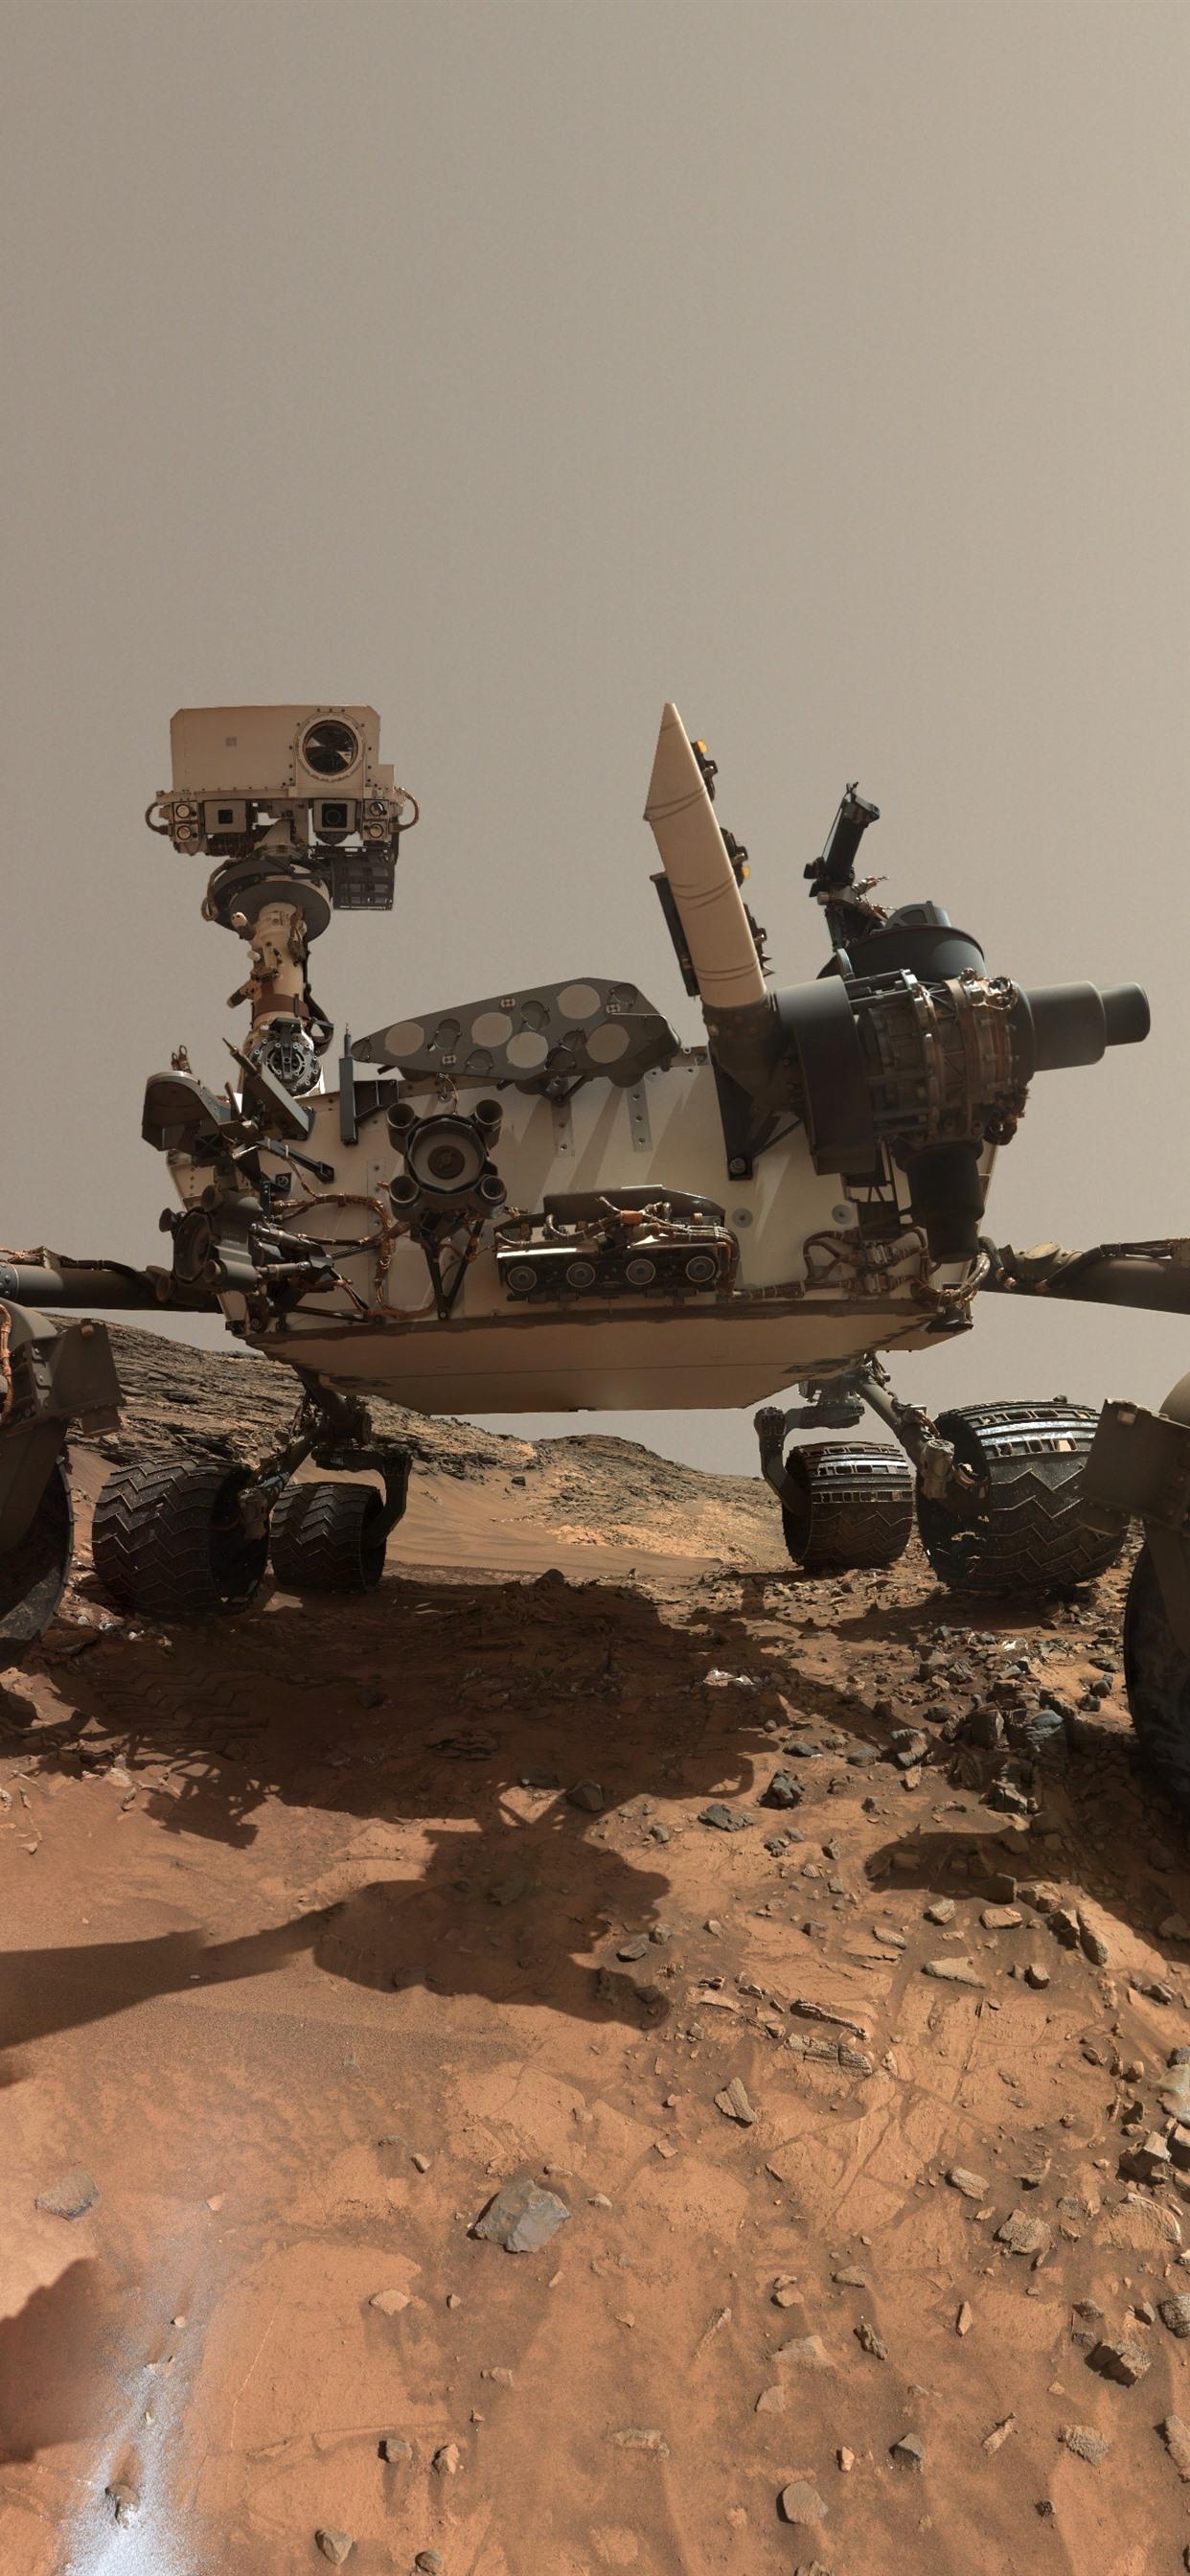 Mars Rover, Curiosity, Planet 1242x2688 IPhone 11 Pro XS Max Wallpaper, Background, Picture, Image